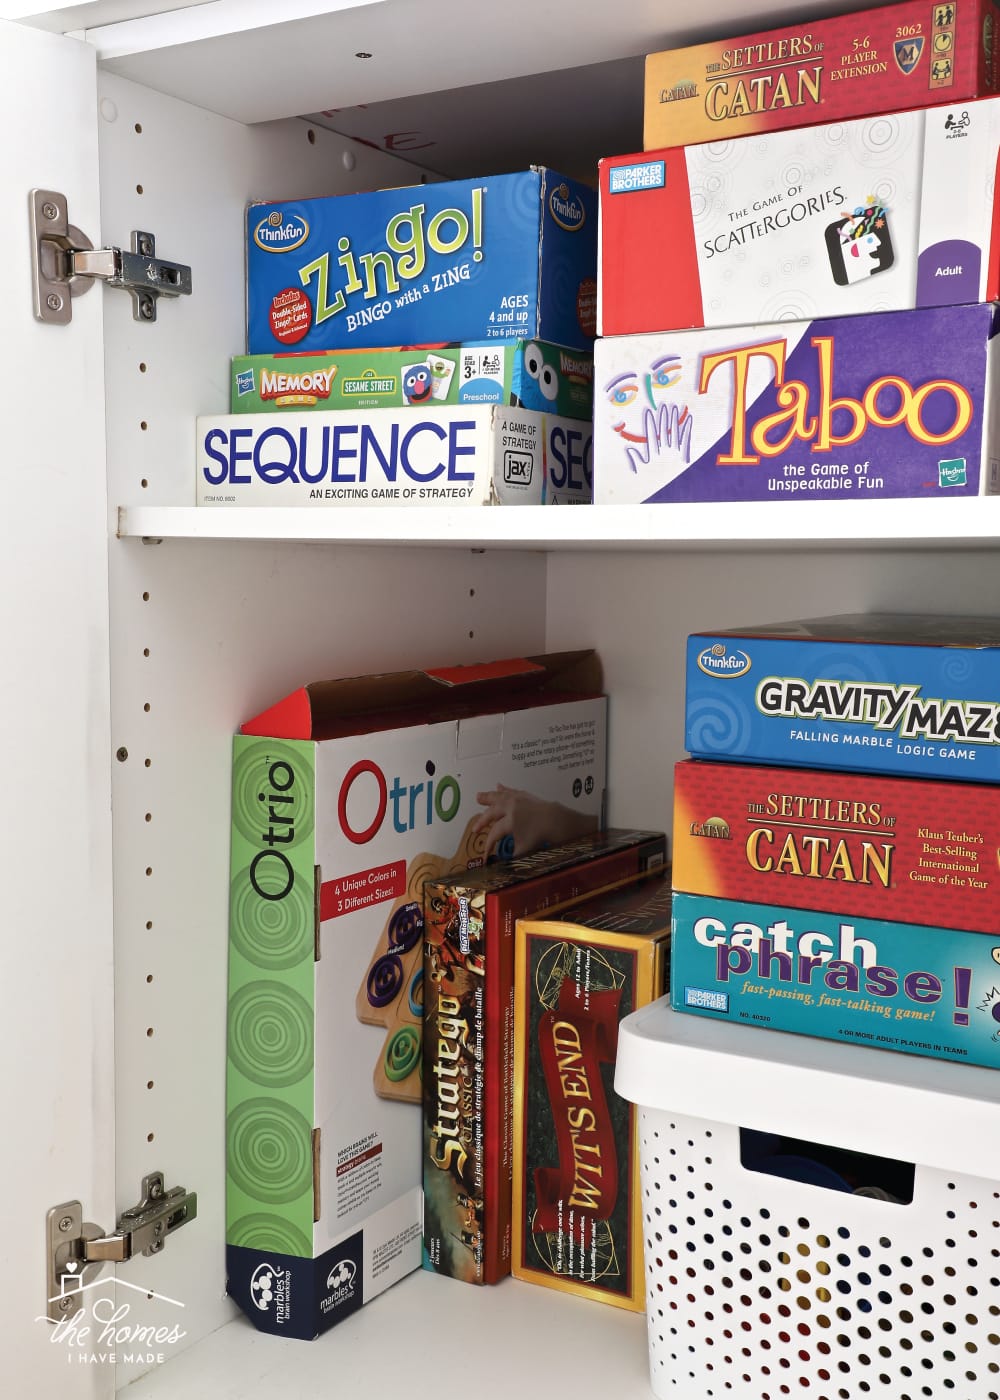 Vertical image of board games organized inside a cabinet